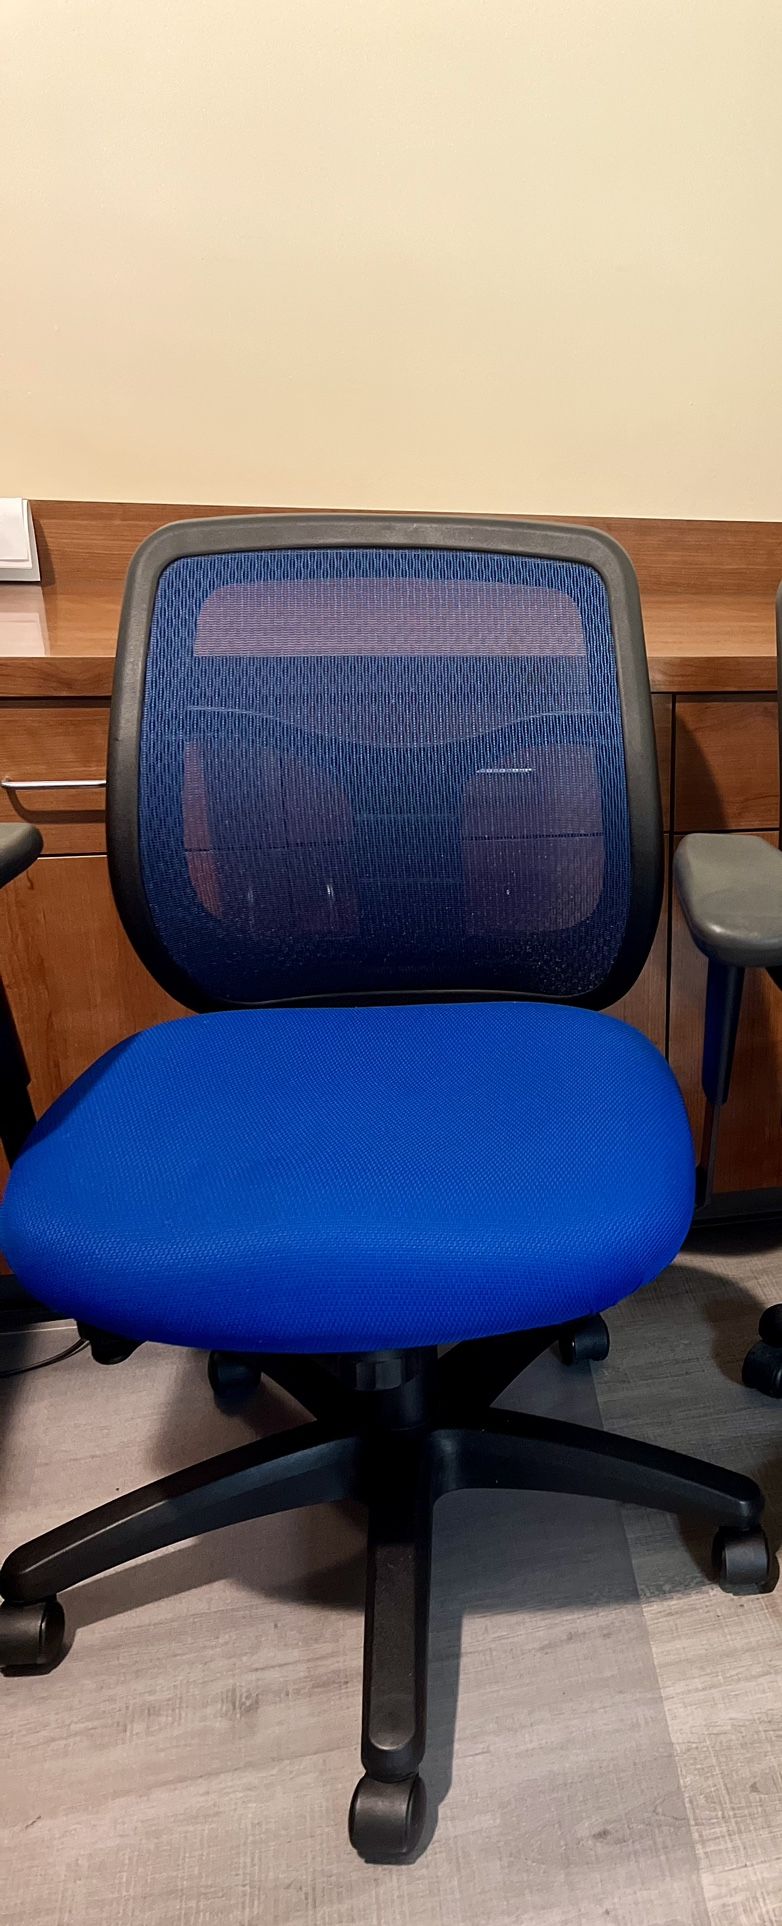 Office Chairs GREAT Condition Herman Miller Aeron Chair, 30 + Size A, Blue, Fully Adjustable Arms, Tilt Limiter And Seat Angle Computer Chairs